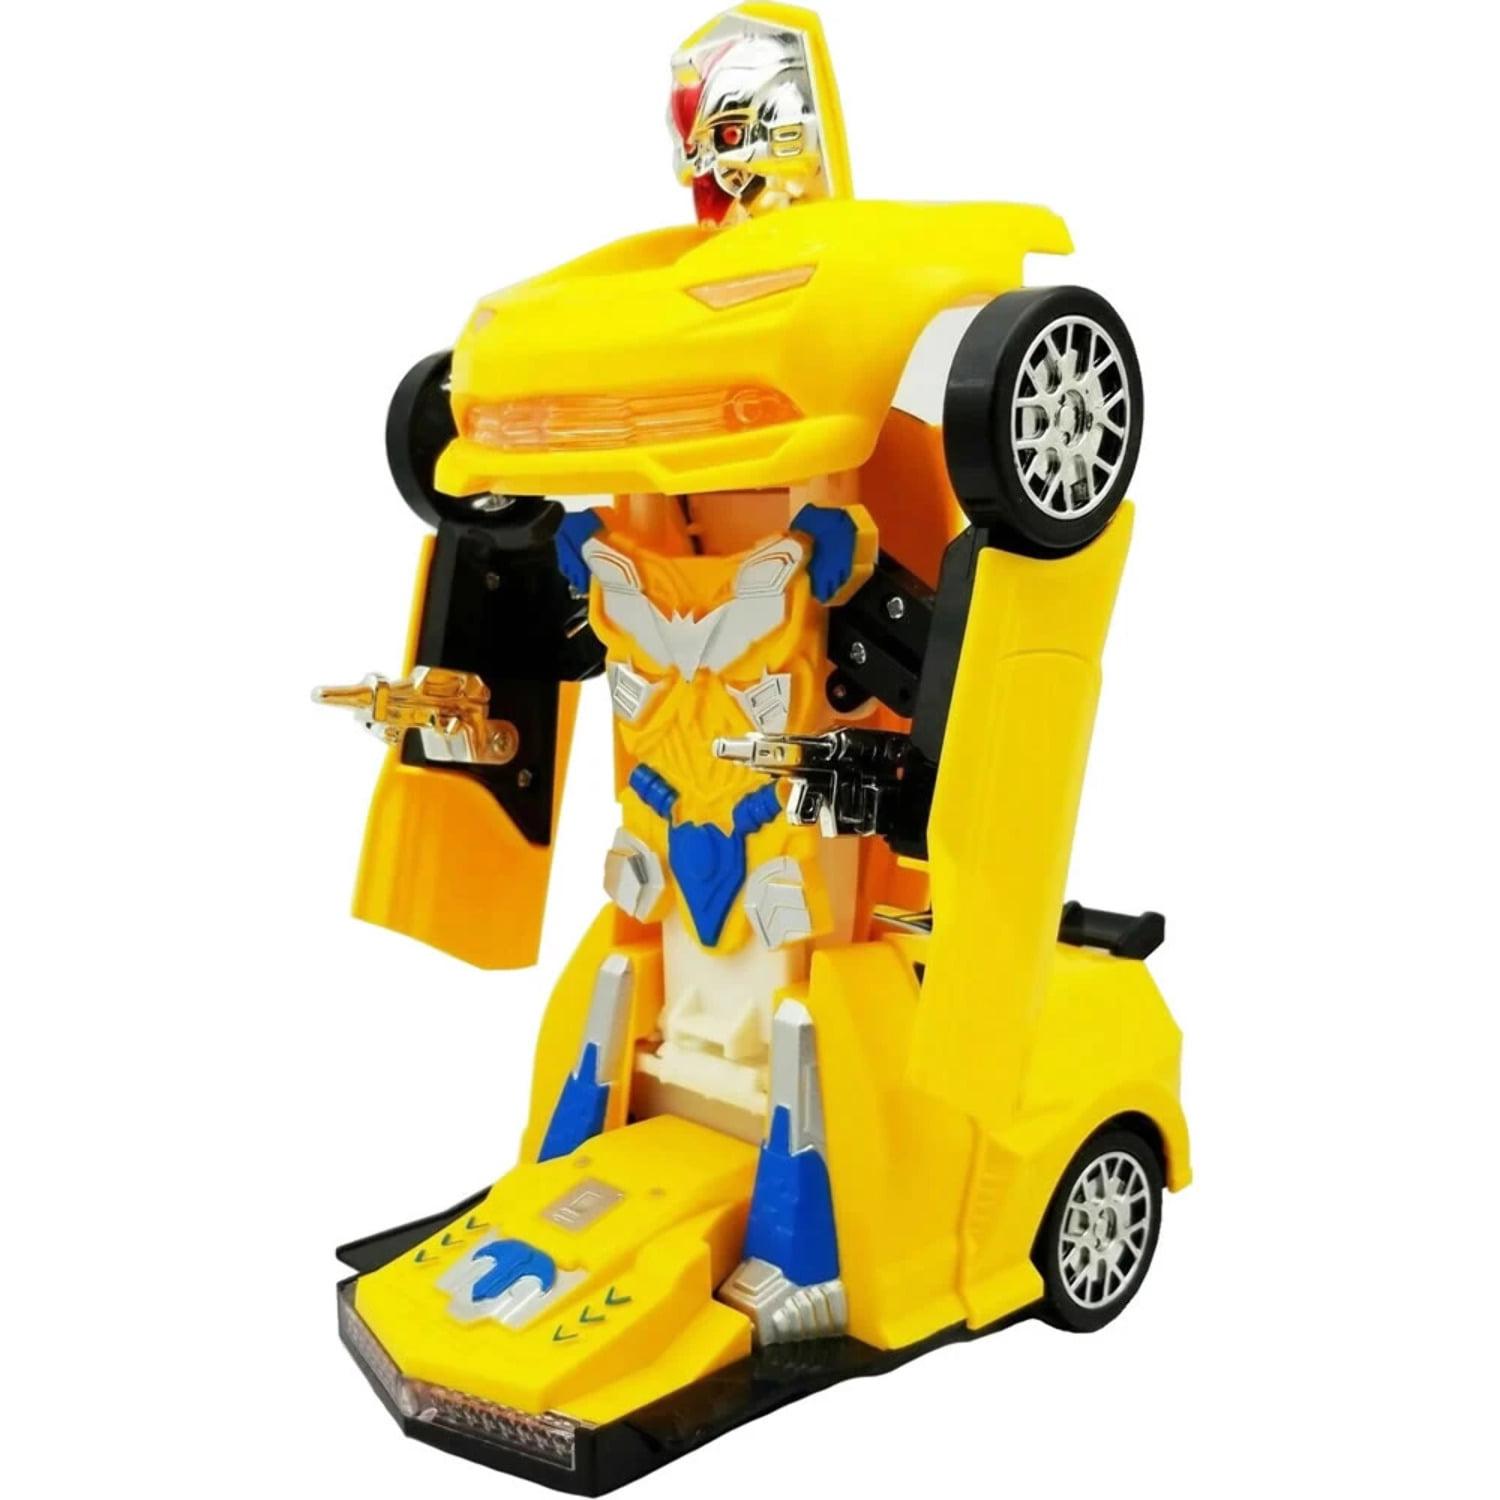 Rc Transformer Toy: Exploring the World of RC Transformer Toys